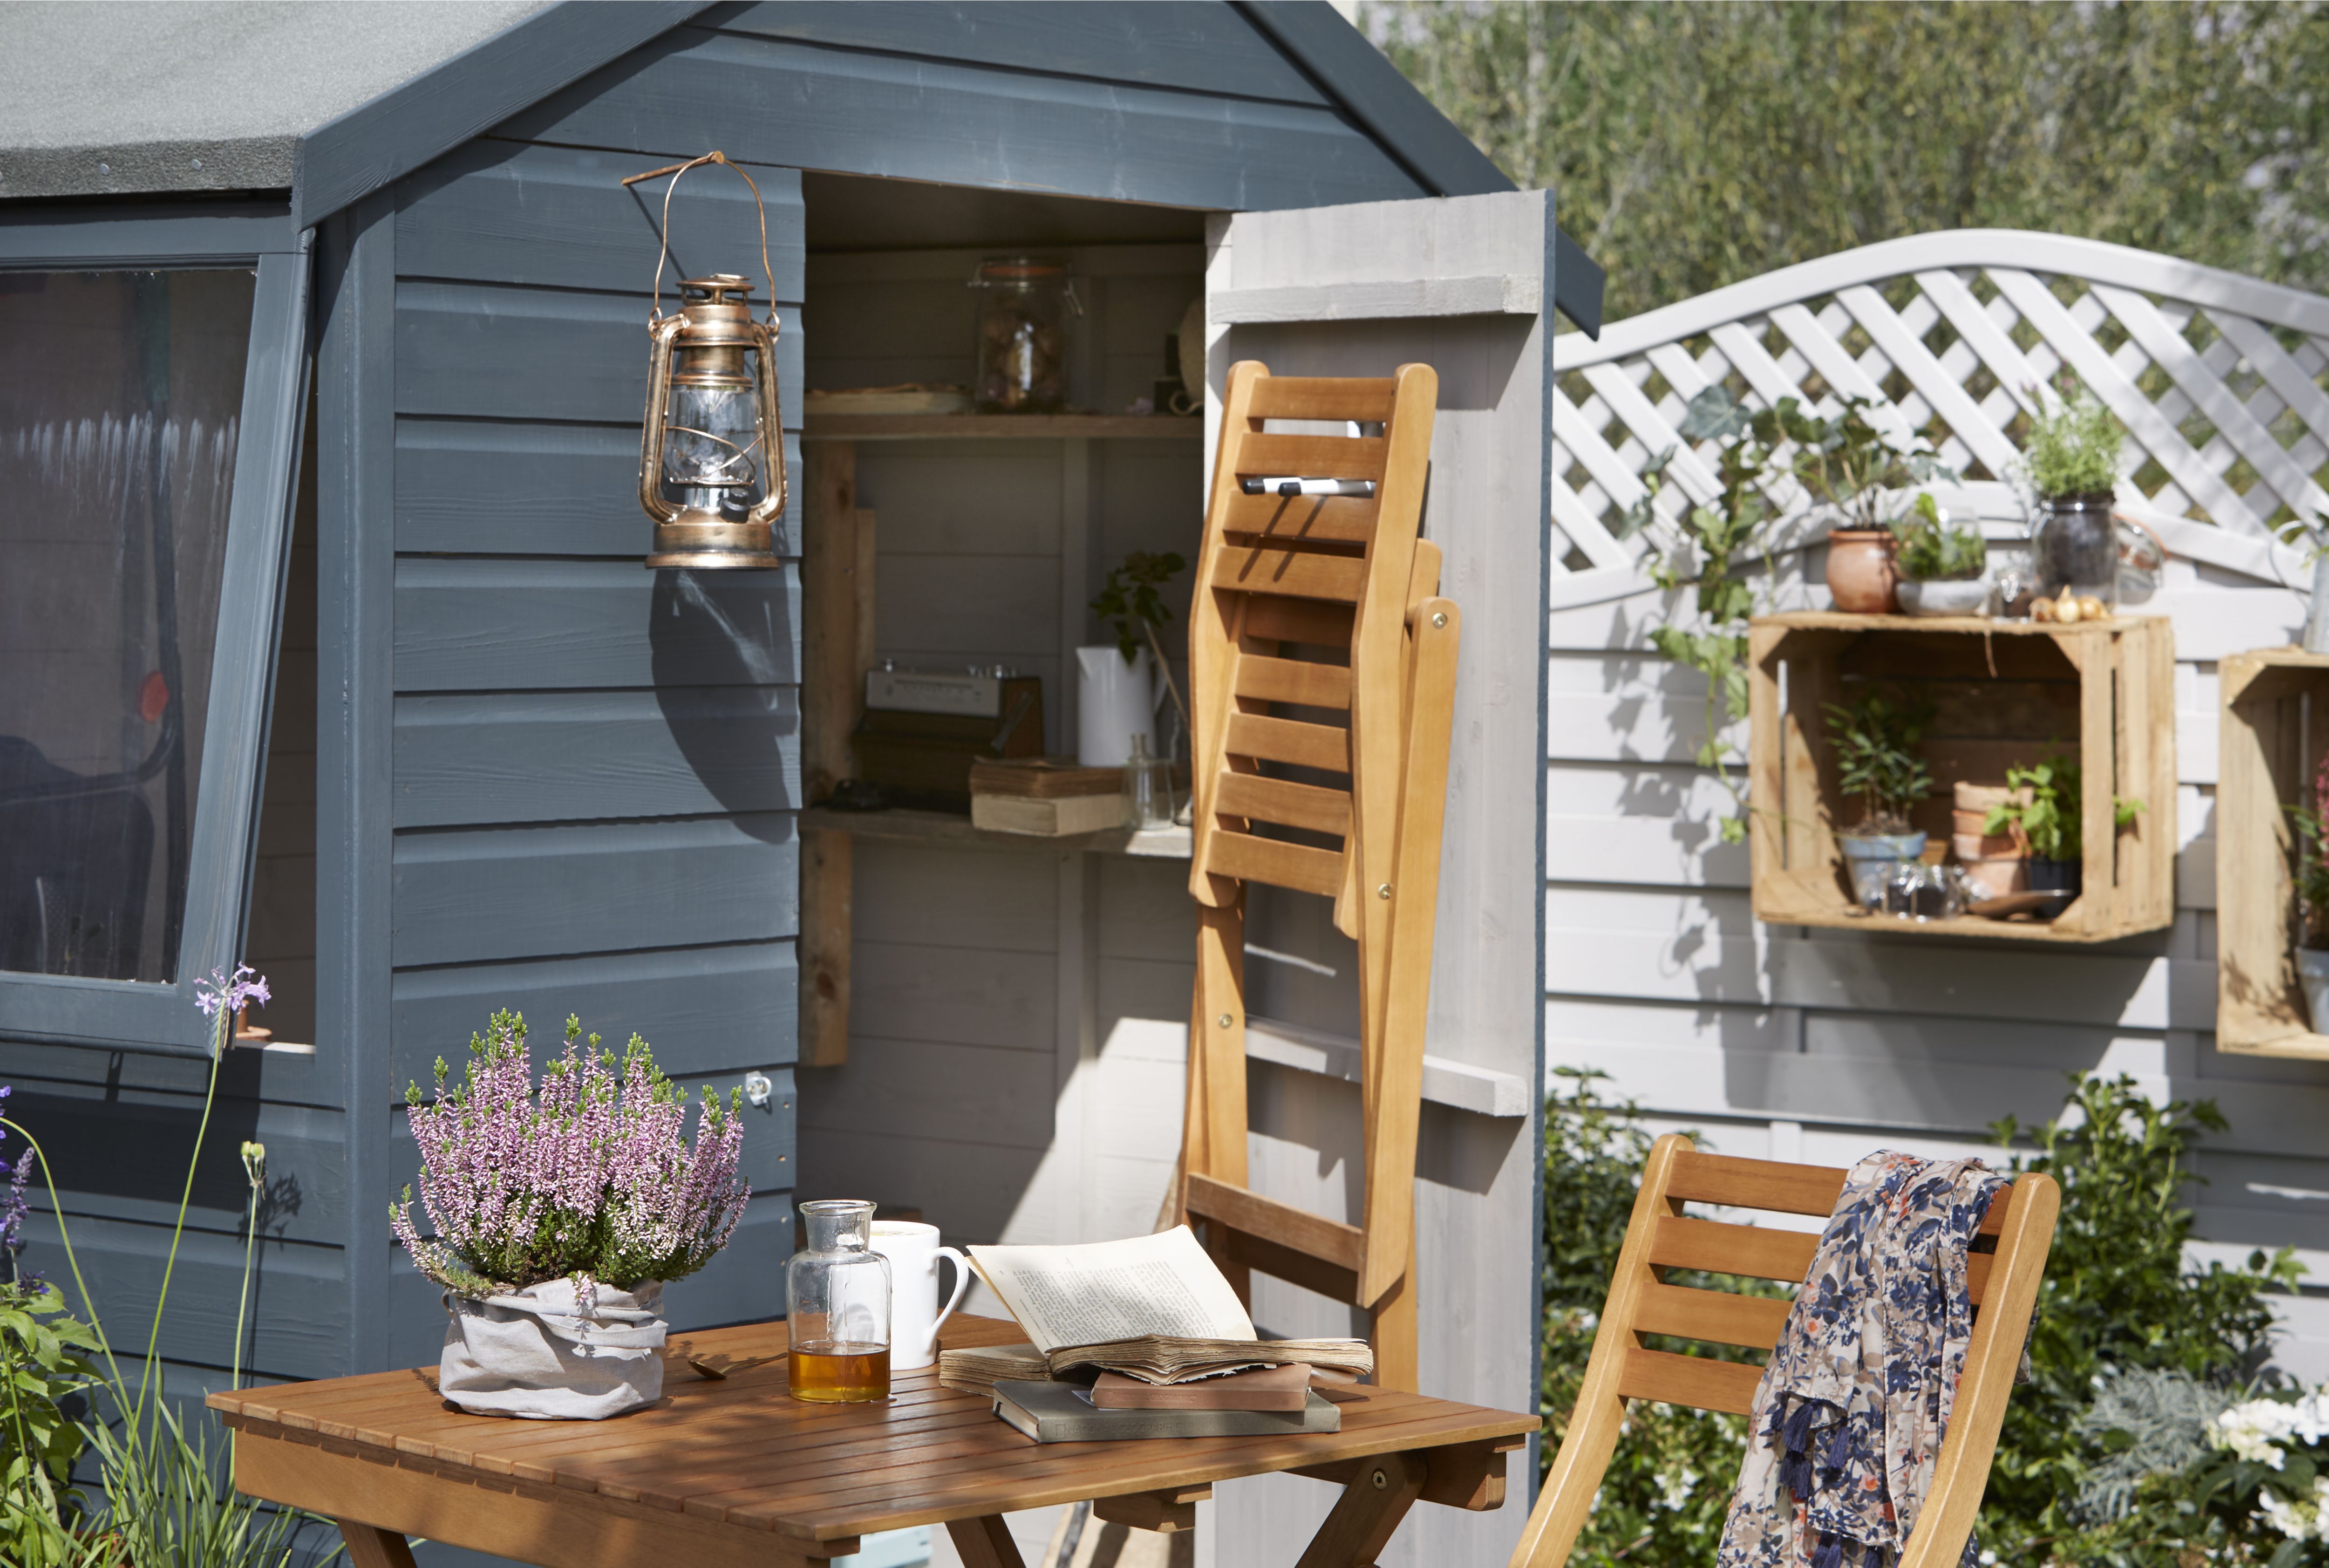 How to paint a wooden shed or fence Ideas &amp; Advice DIY 